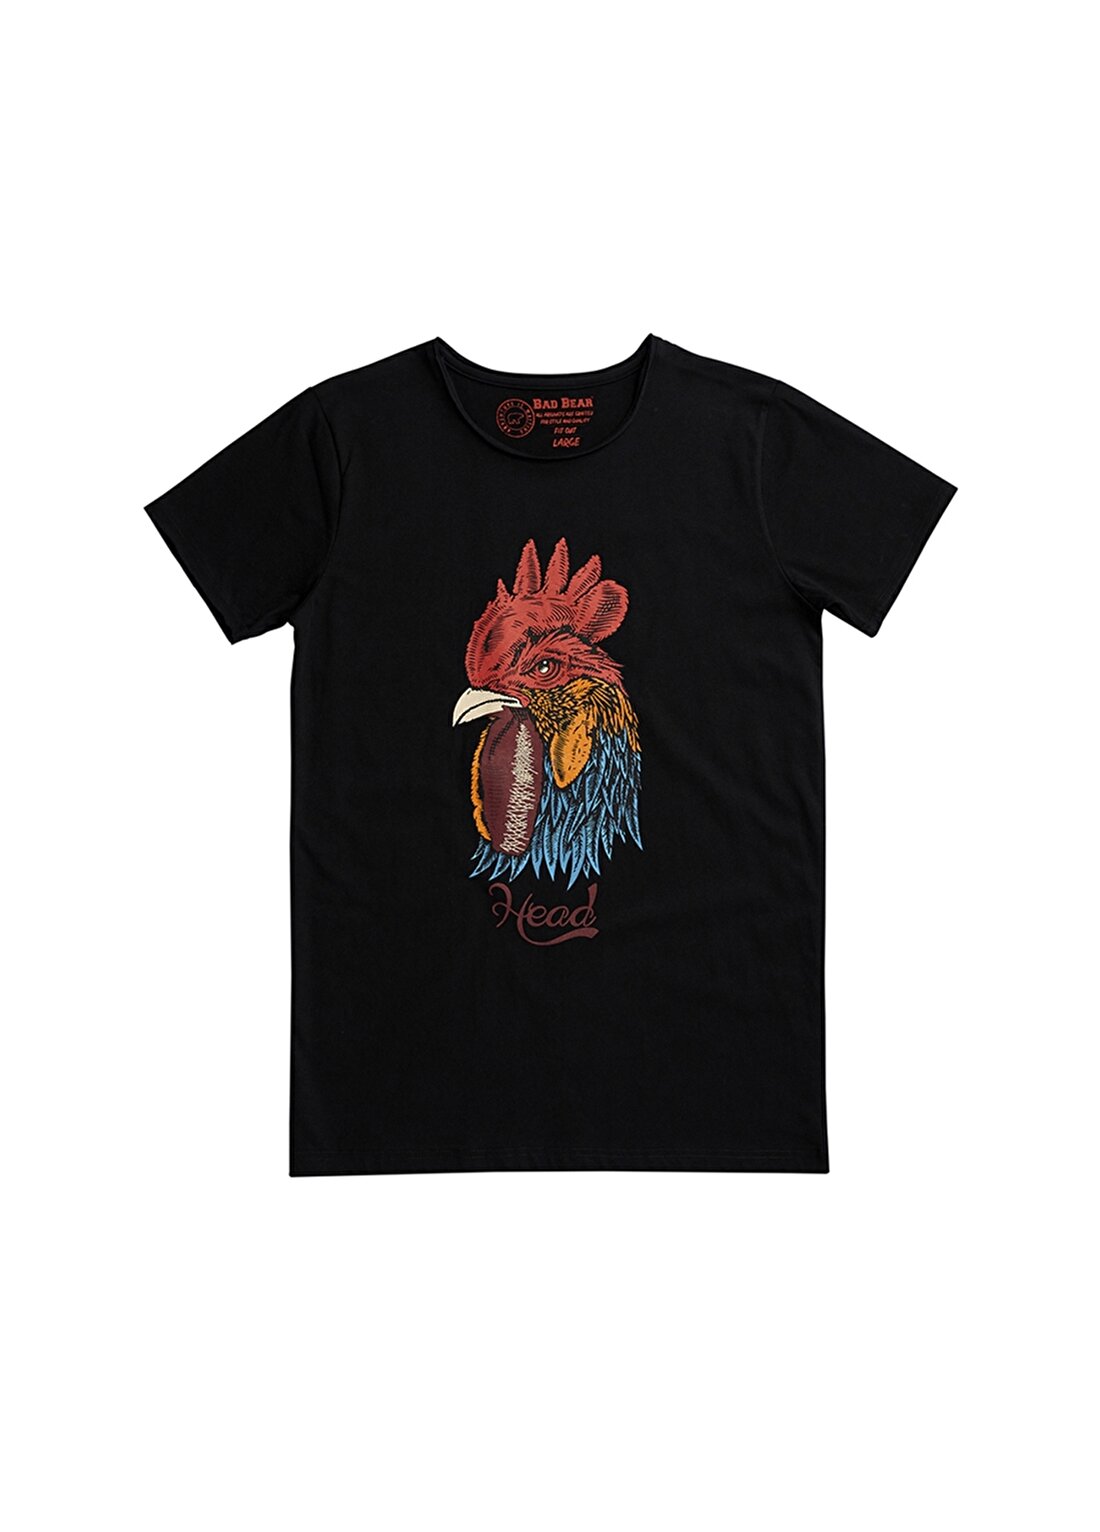 Bad Bear Rooster T-Shirt